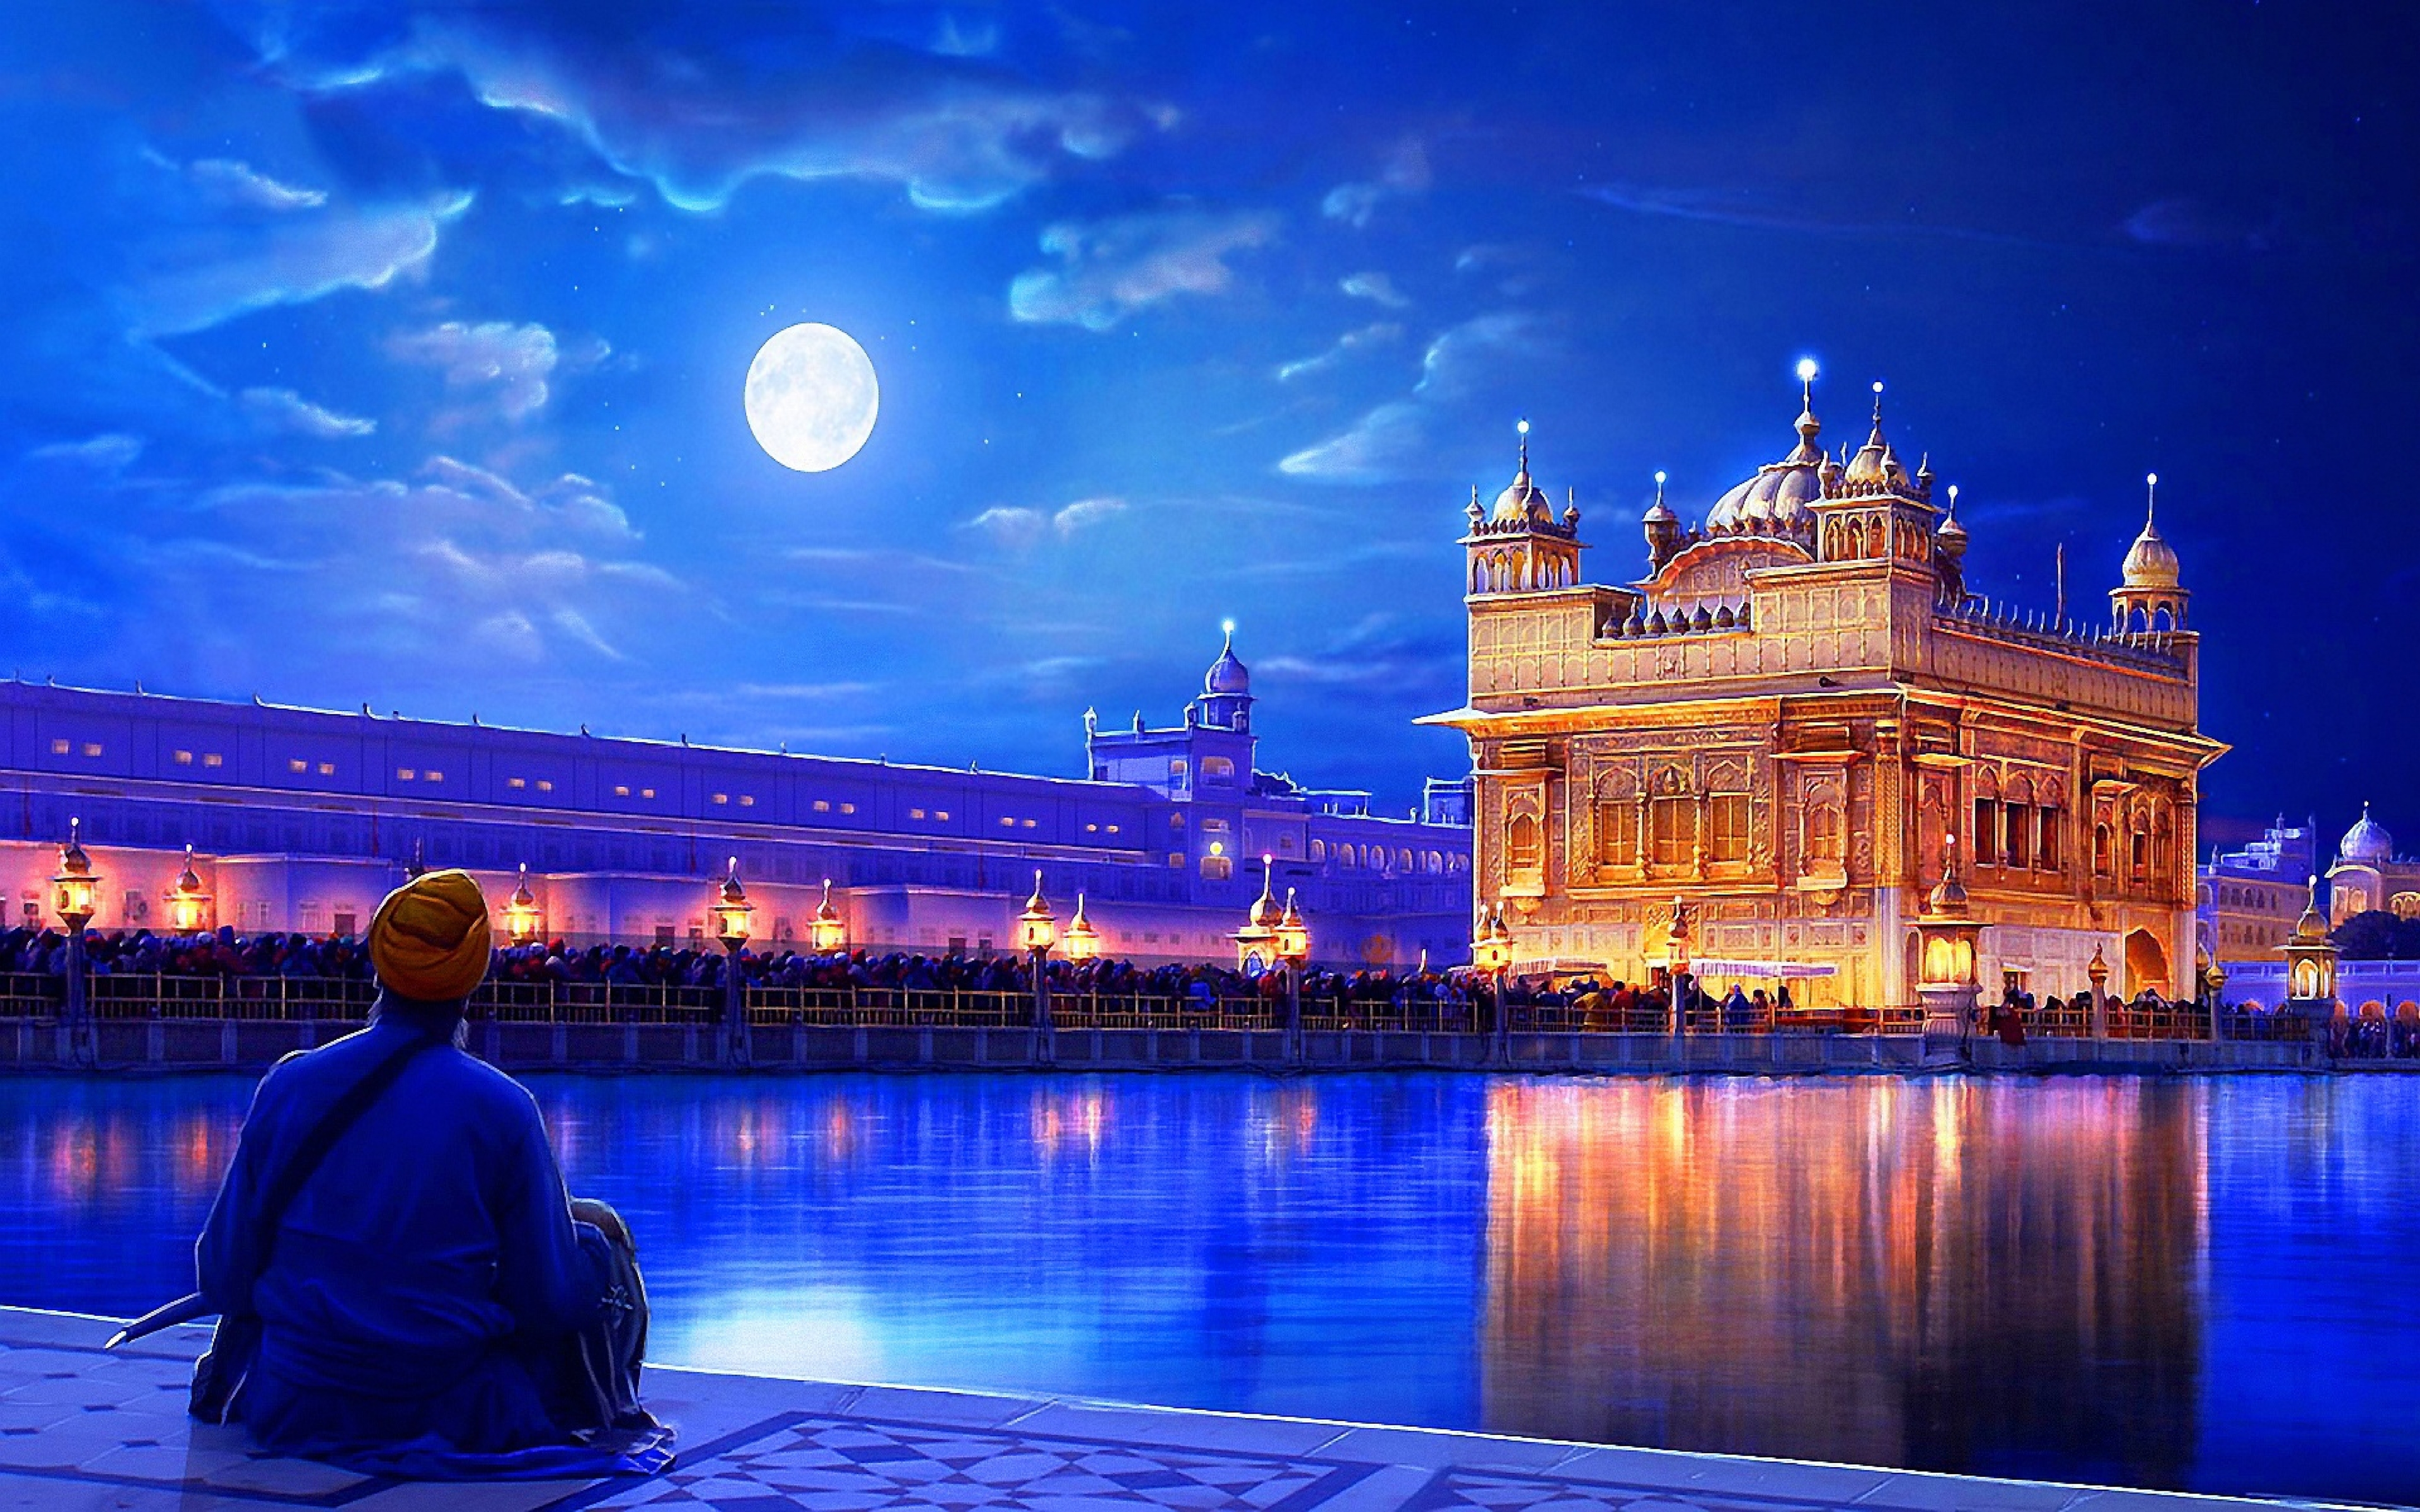 Golden Temple Amritsar India for 5120 x 3200 5K Ultra Wide resolution